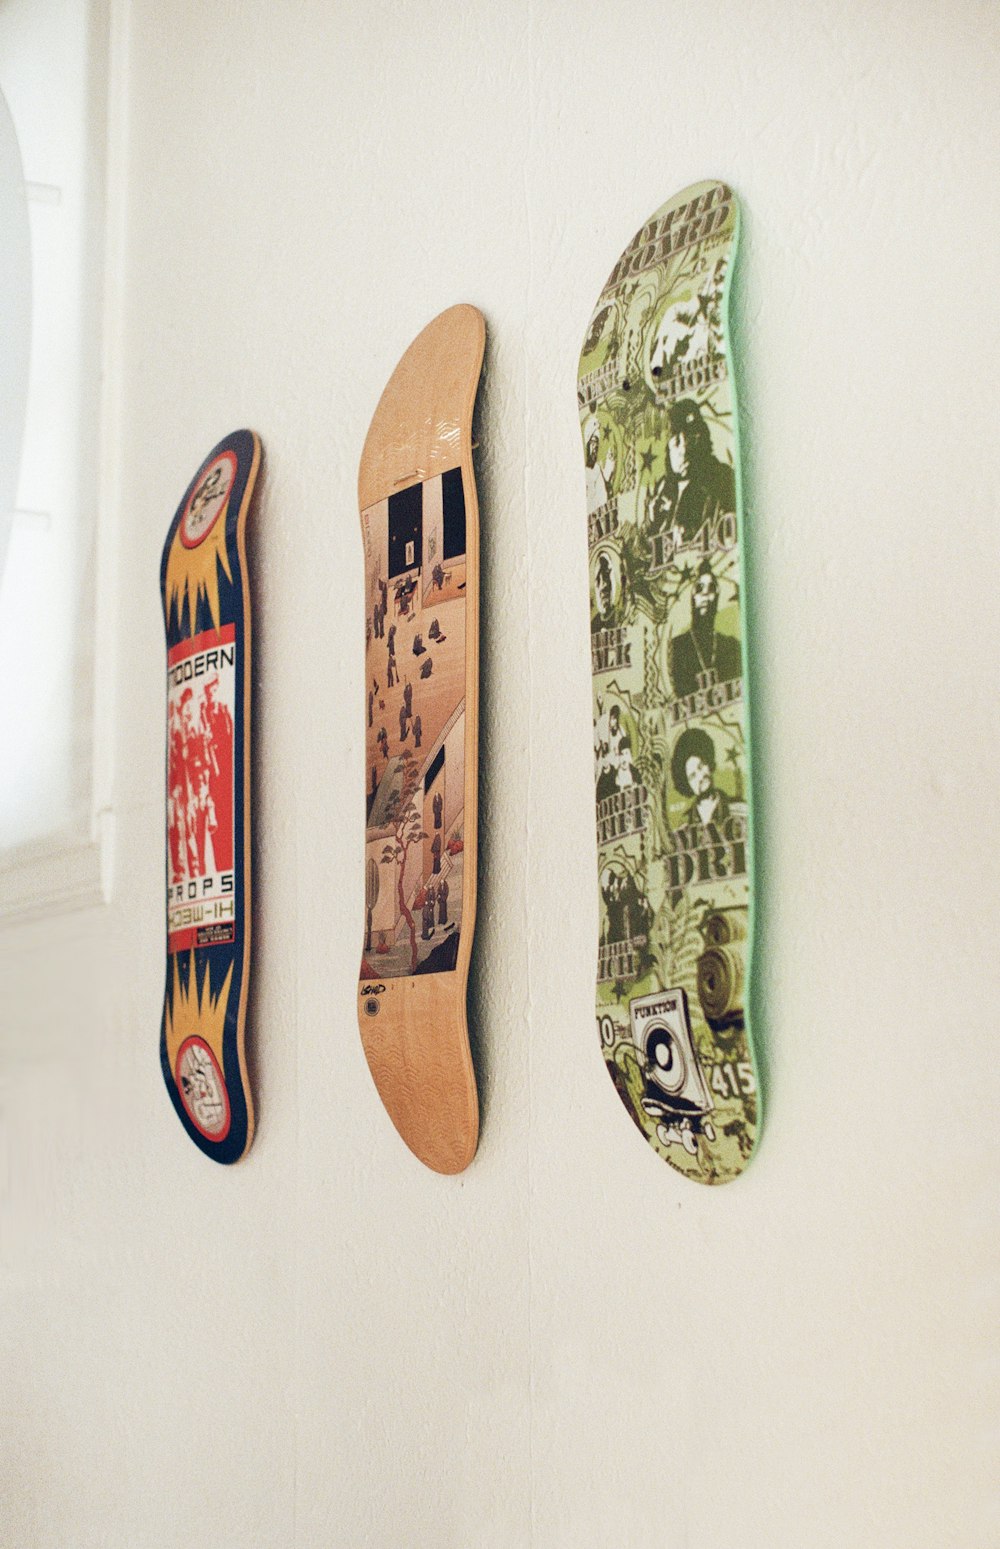 three skateboards mounted to a wall in a room